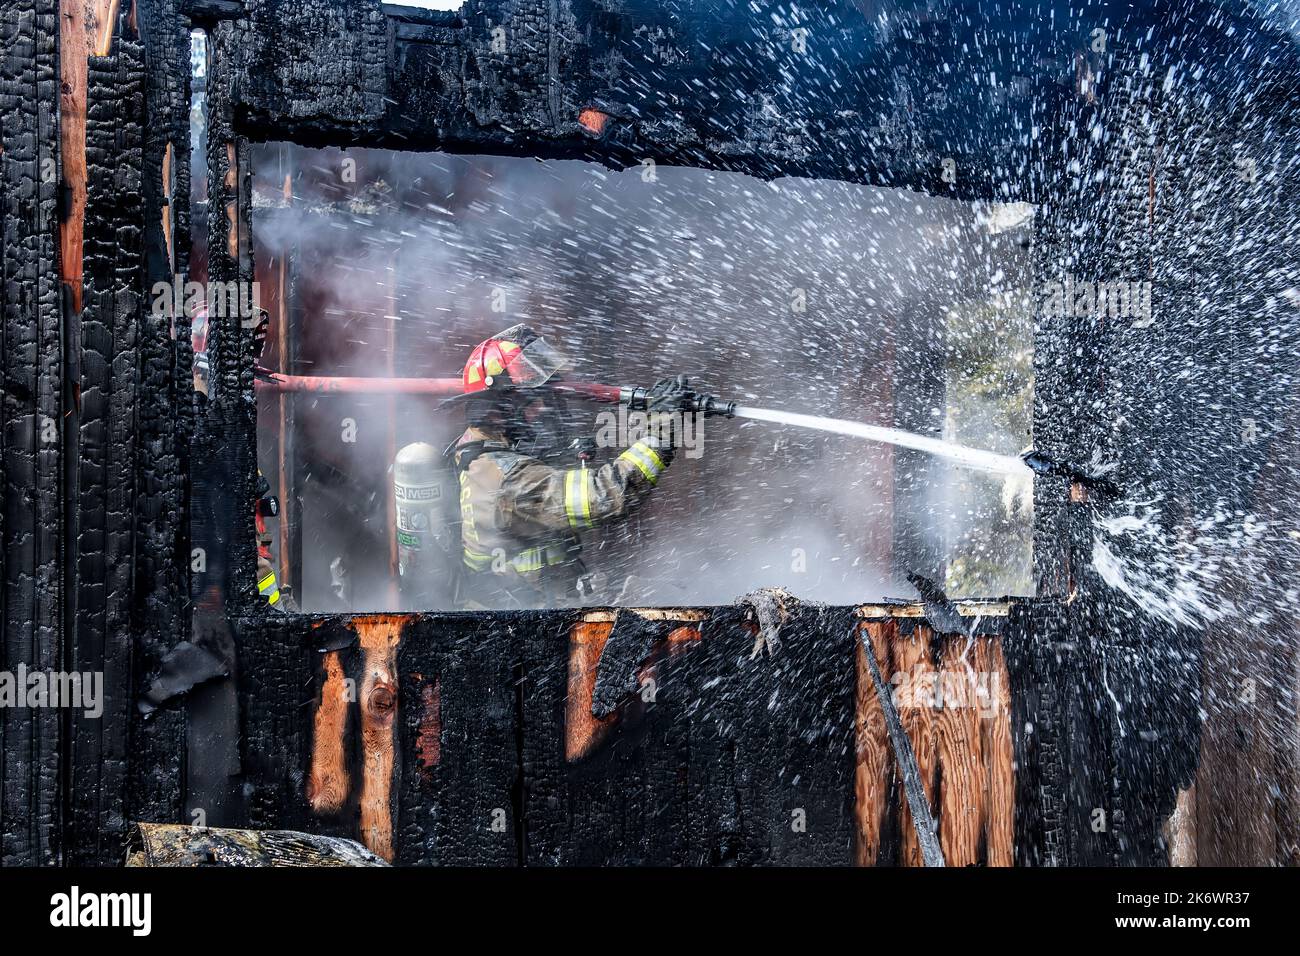 A firefighter uses a hose to extinguish hot spots and soak down the walls as members of the Springs Fire Department, along with mutual aid from member Stock Photo